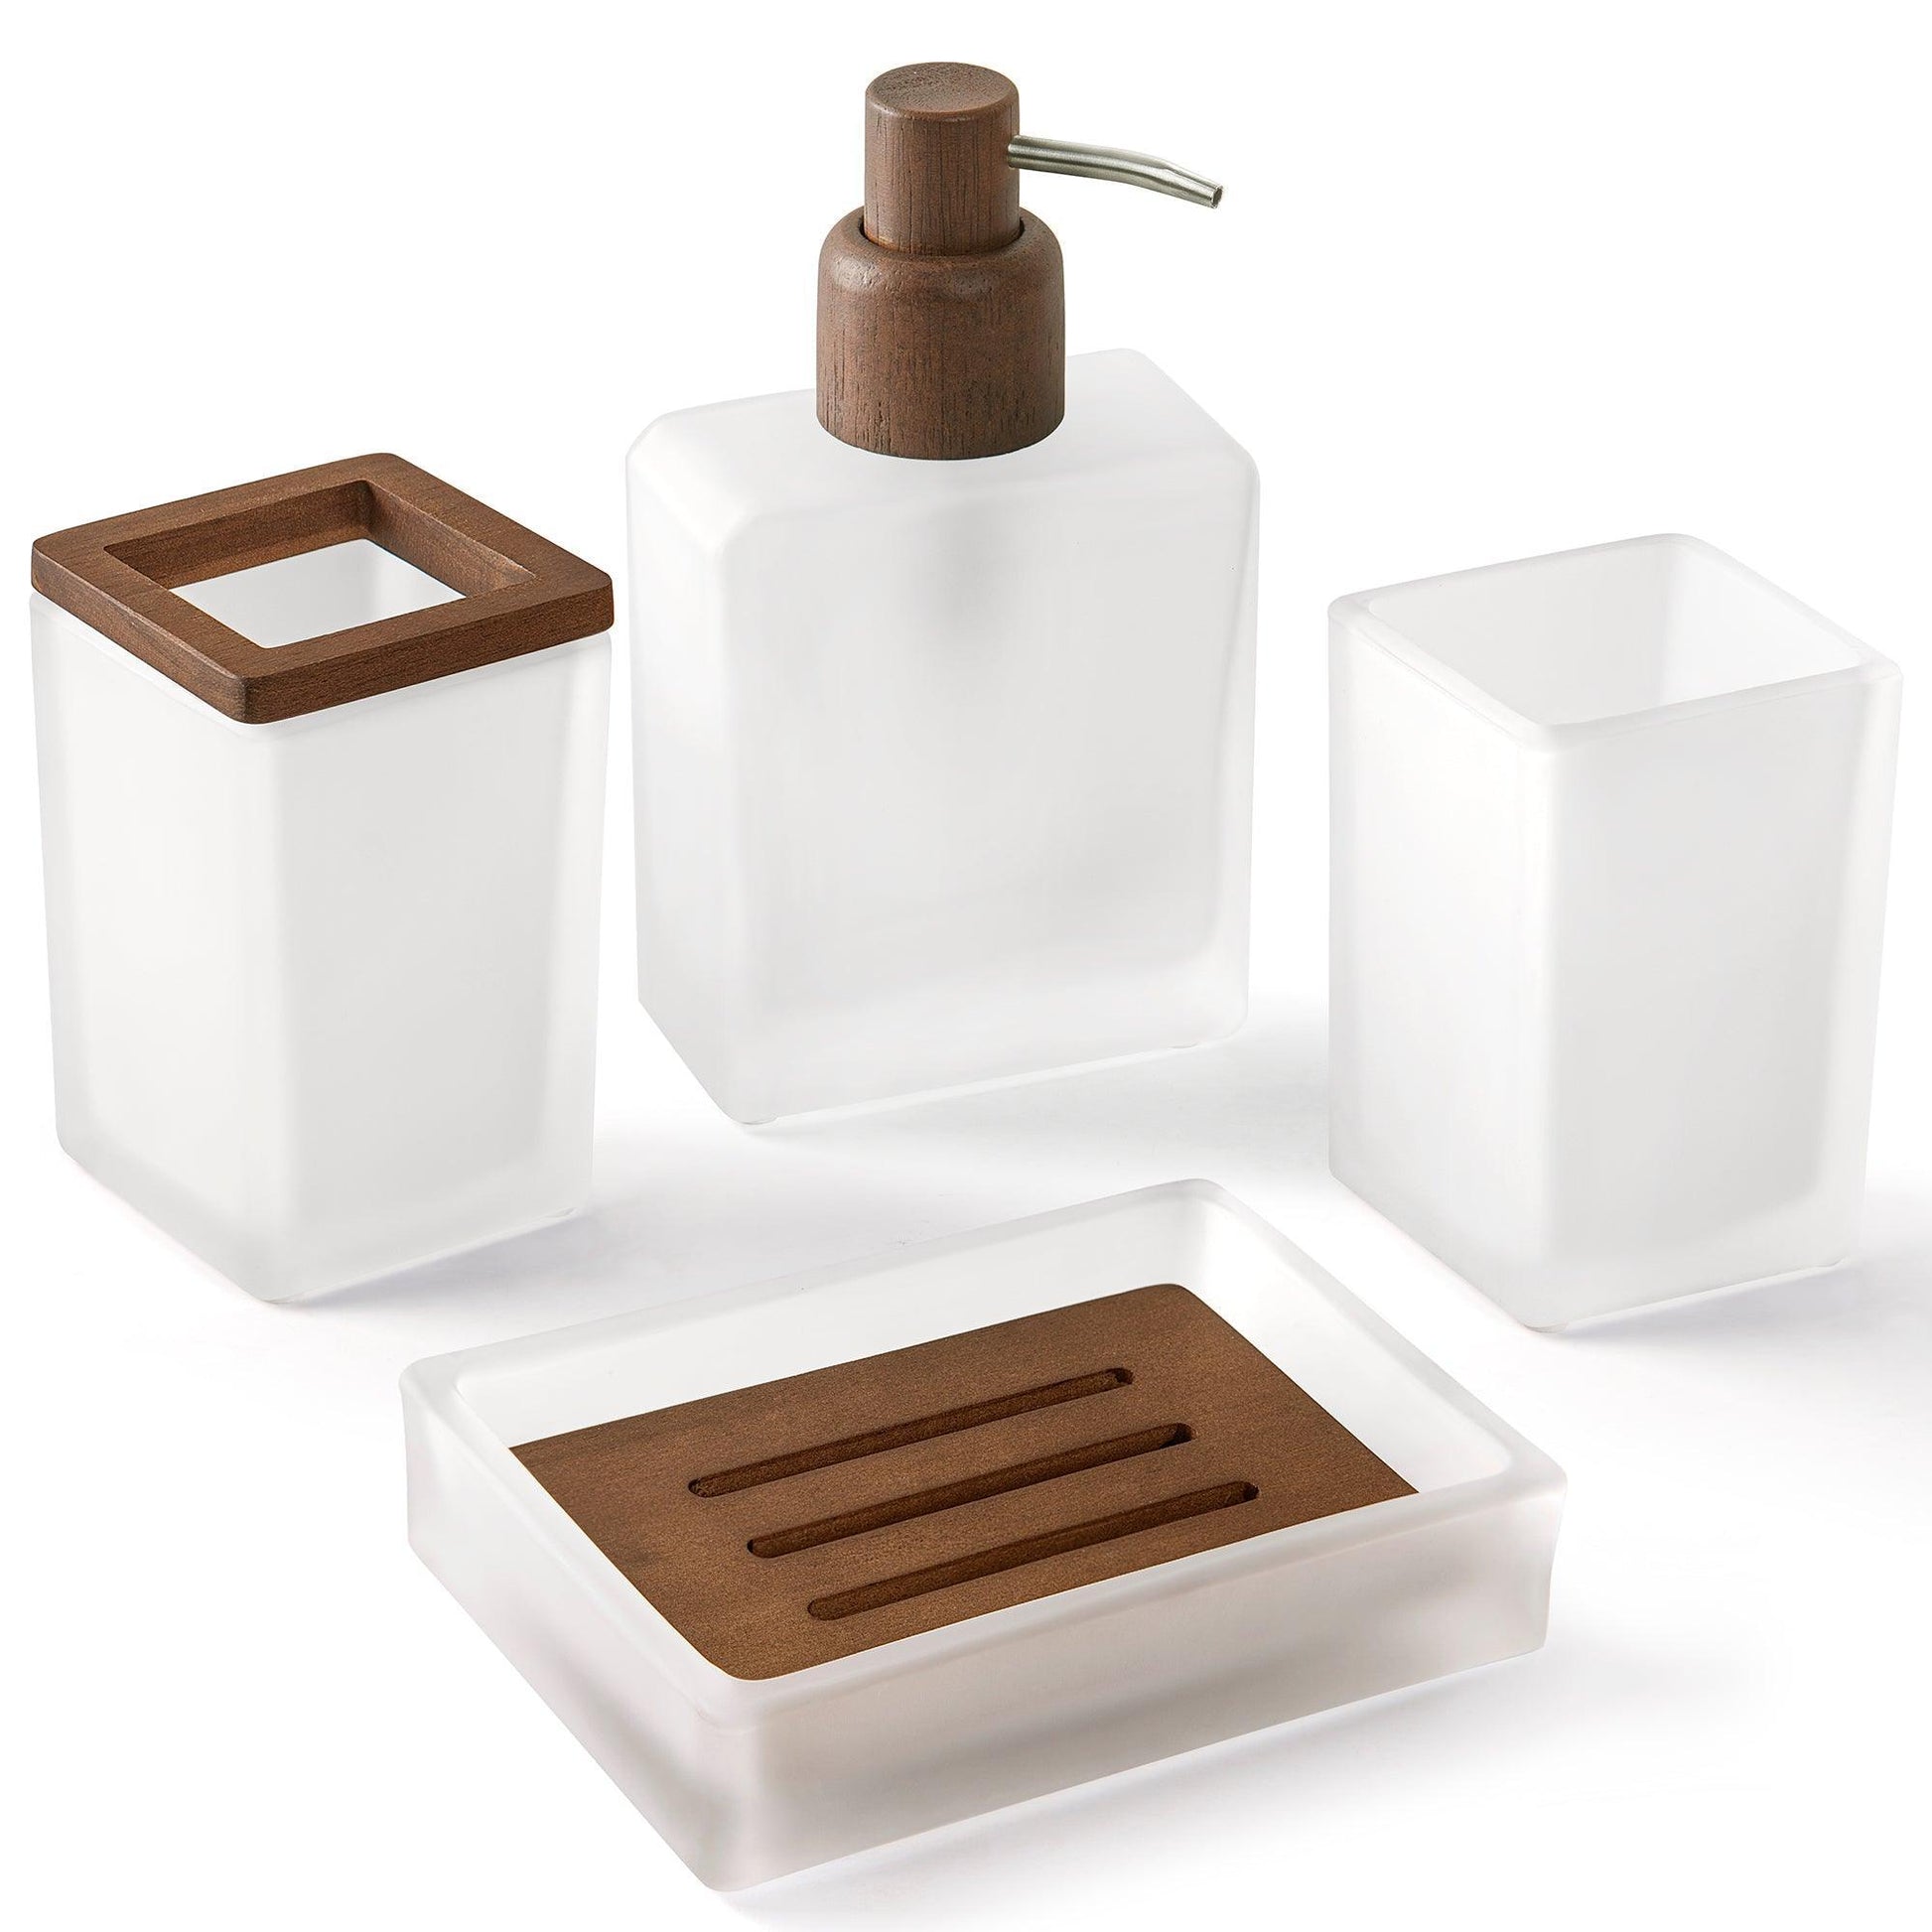 Frosty Glass 4-Piece Bathroom Accessory Set - Allure Home Creation